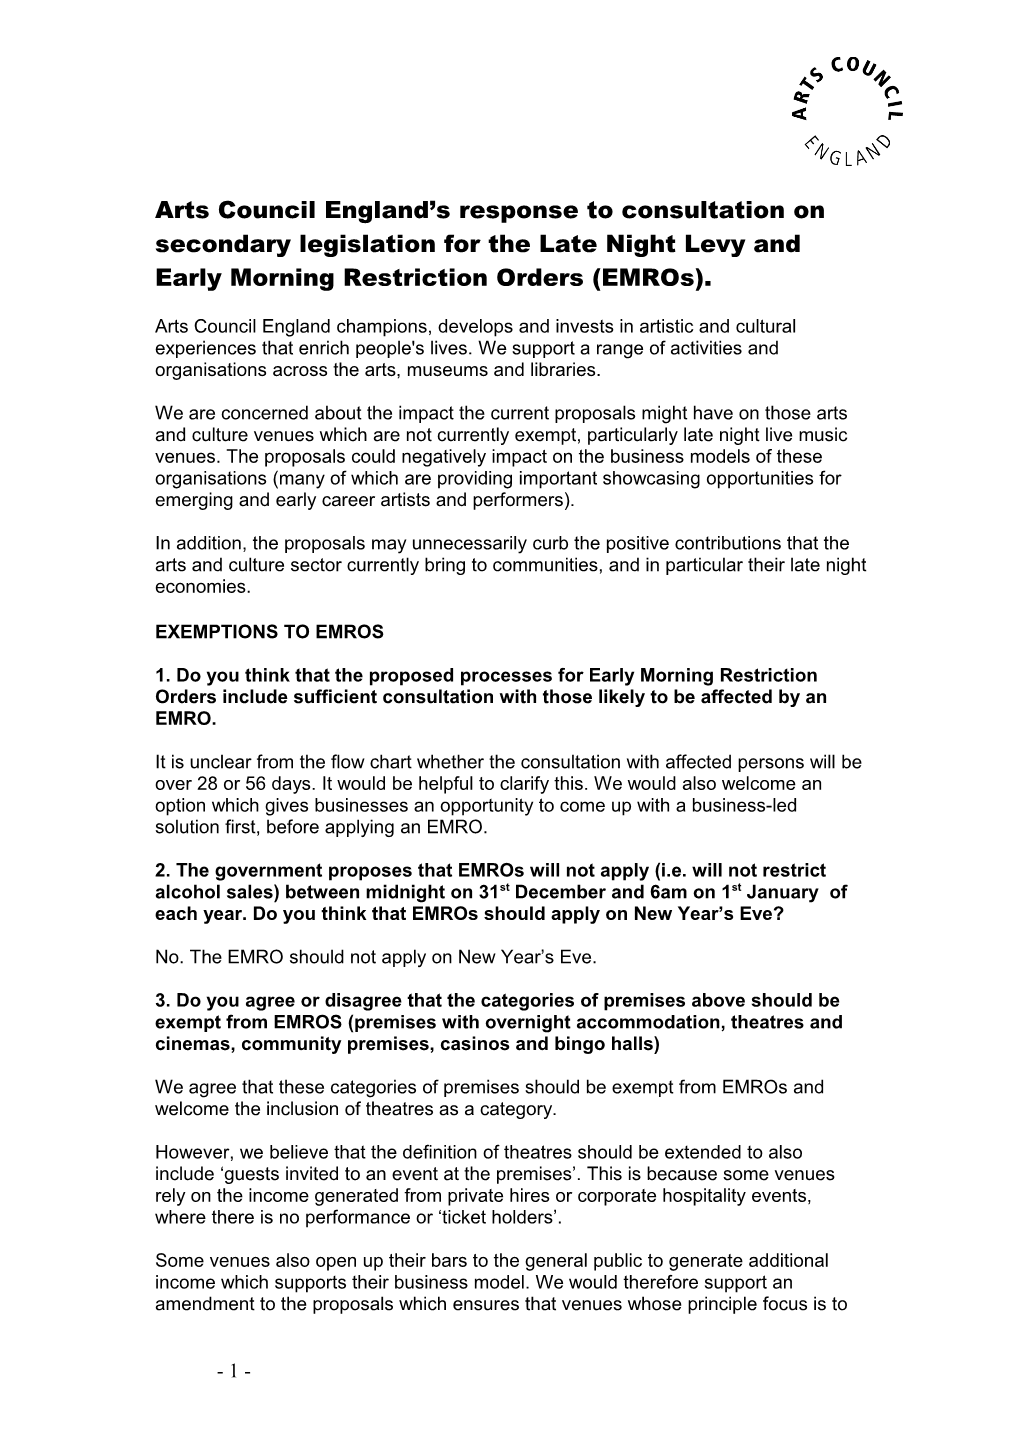 EMROS and LATE NIGHT LEVY CONSULTATION